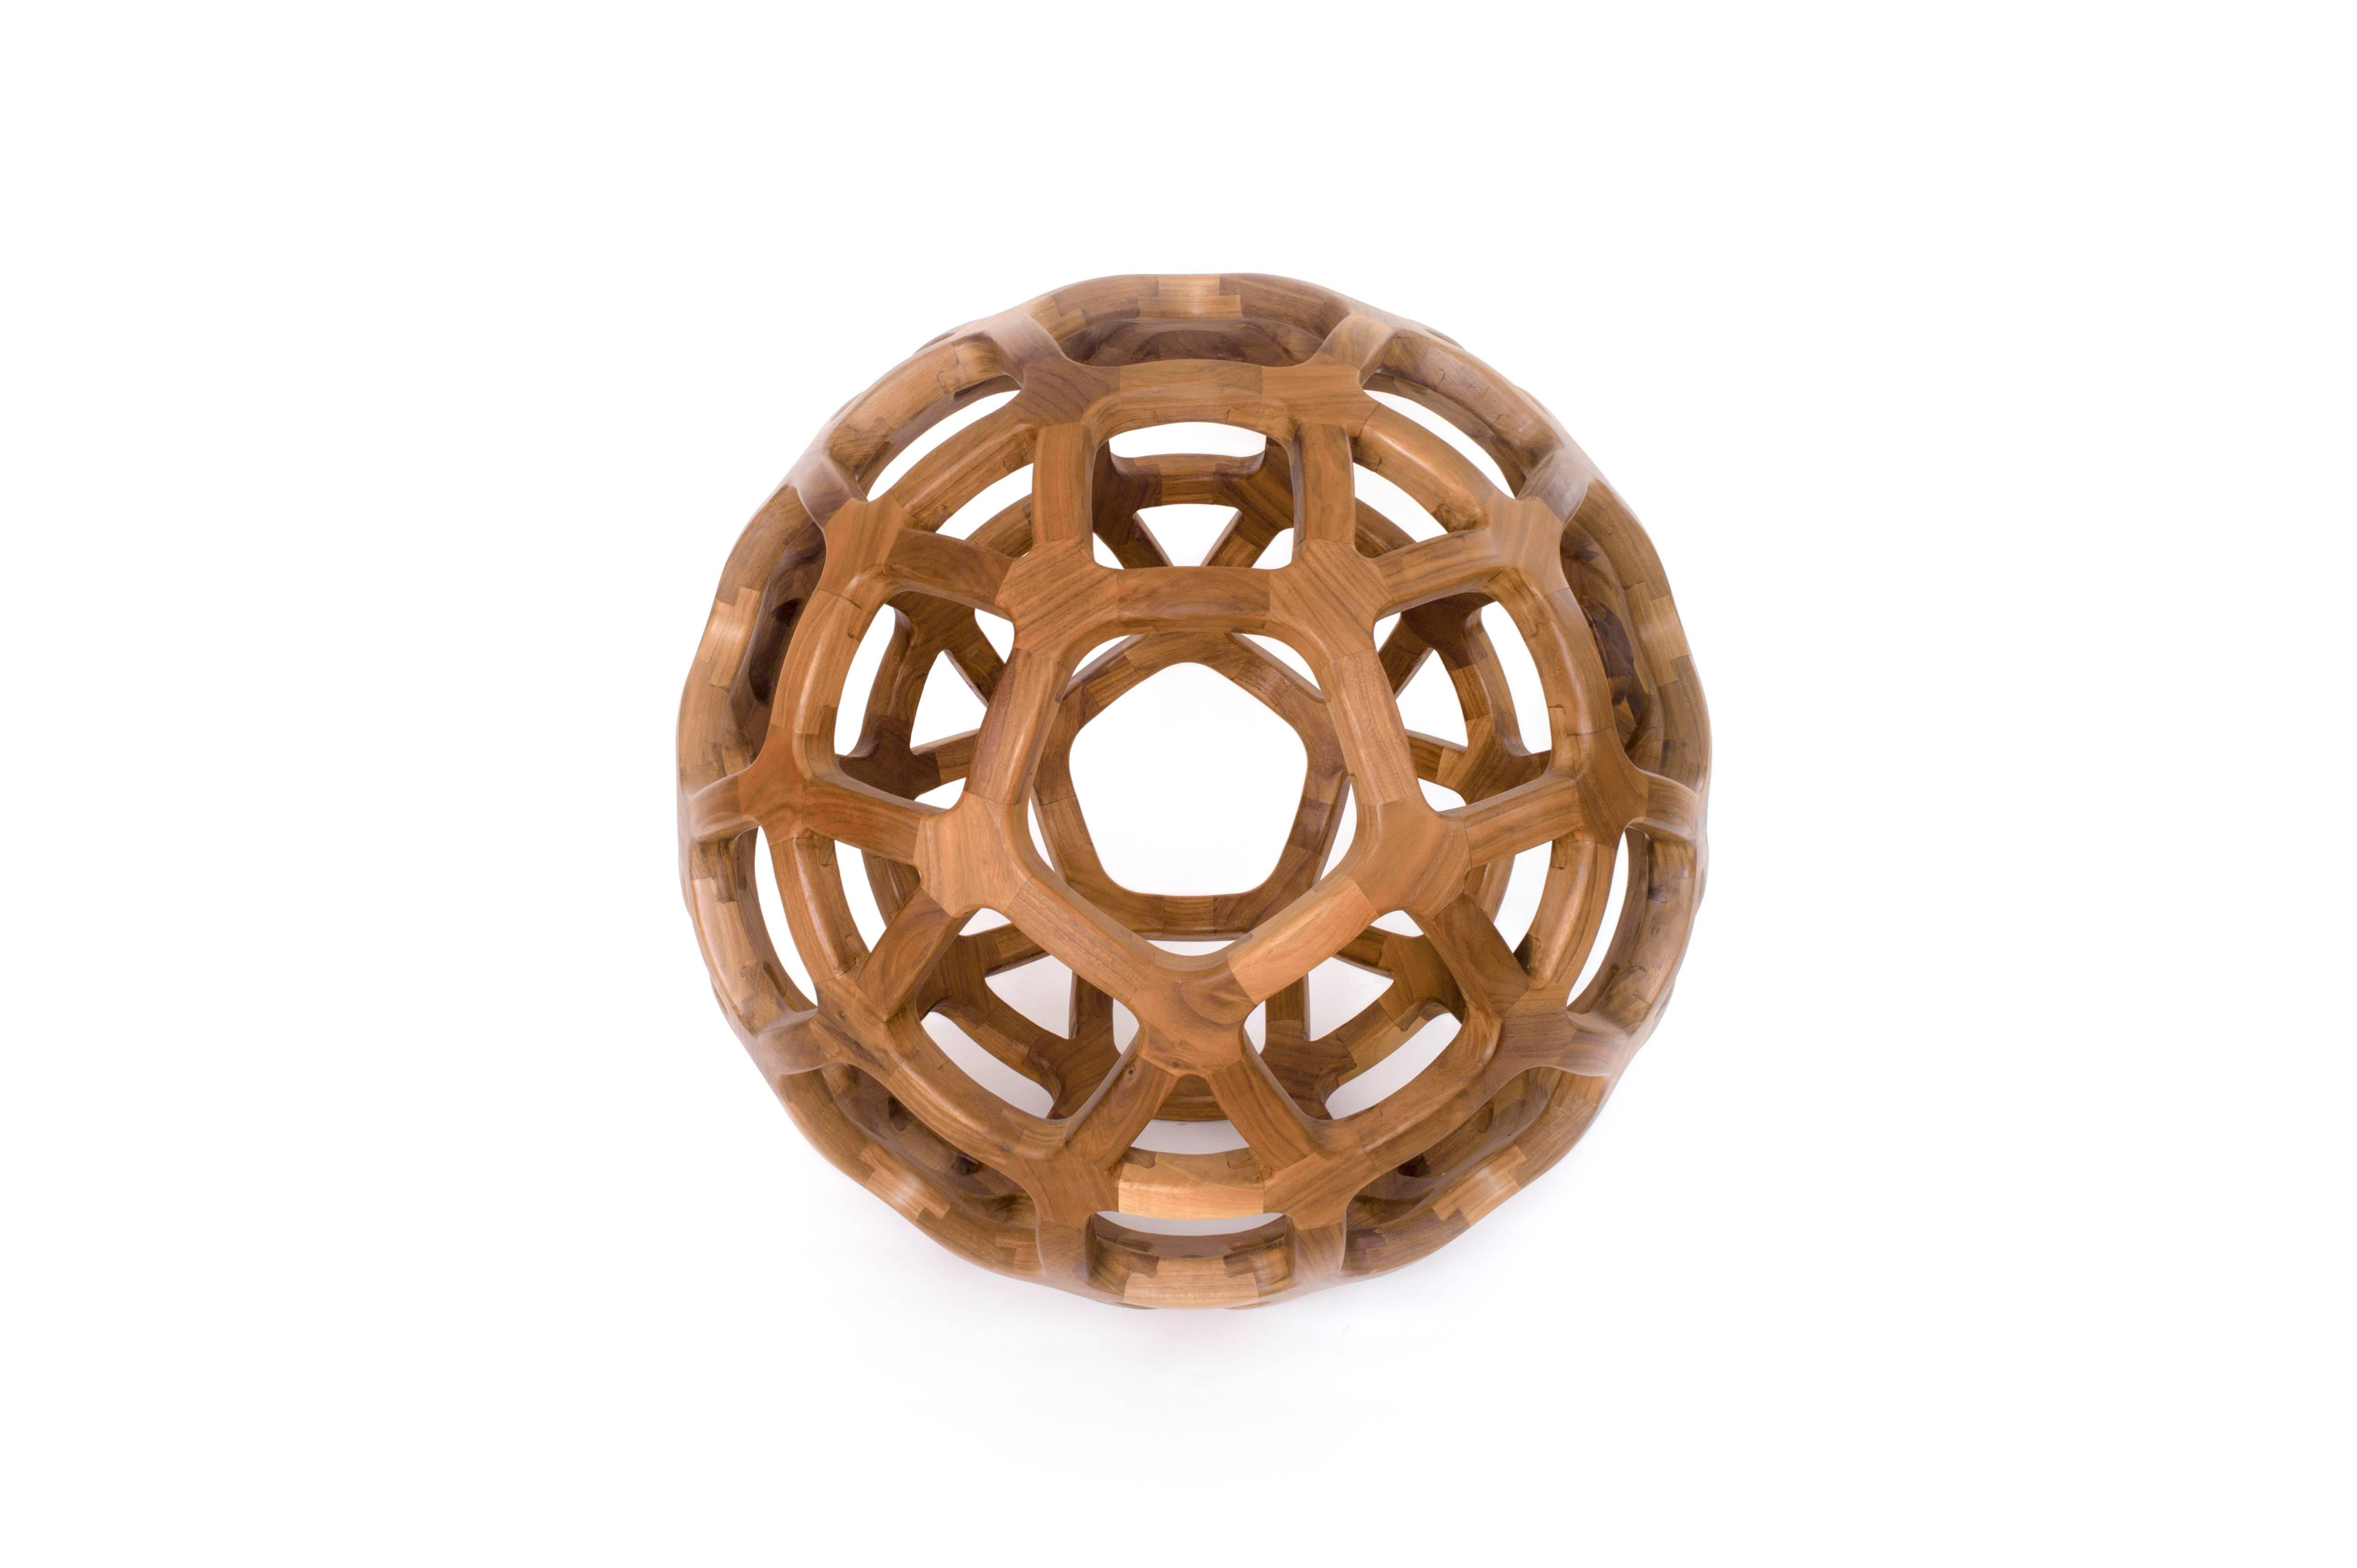 This is a limited edition solid walnut sculpture created by renowned Mexican designer Pedro Cerisola, whose work is in the permanent collection of the National Autonomous University Science Museum and has been exhibited in the Franz Mayer Design